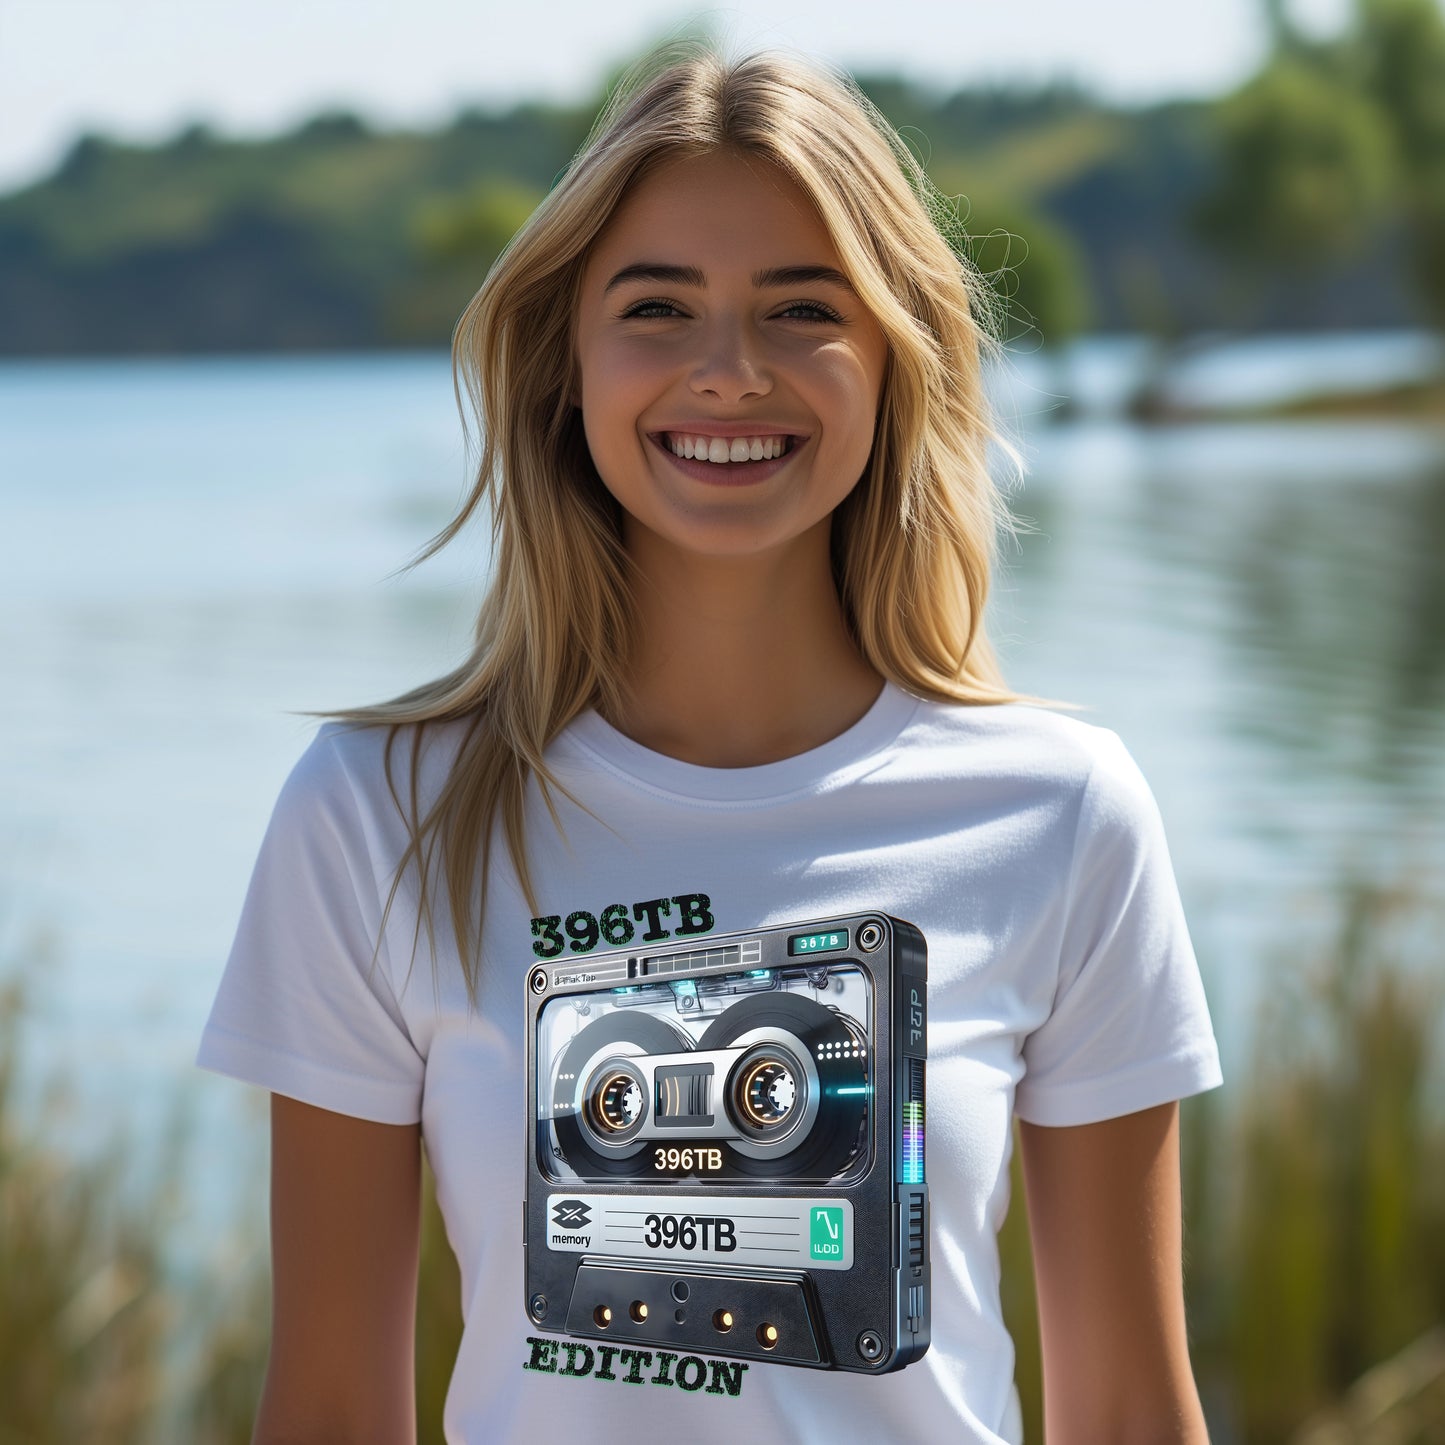 Retro Cassette Tape T-Shirt: 396TB Edition - Retro Resurgence for Vintage Tech Fans and Music Enthusiasts, A Unique Twist on Classic Style